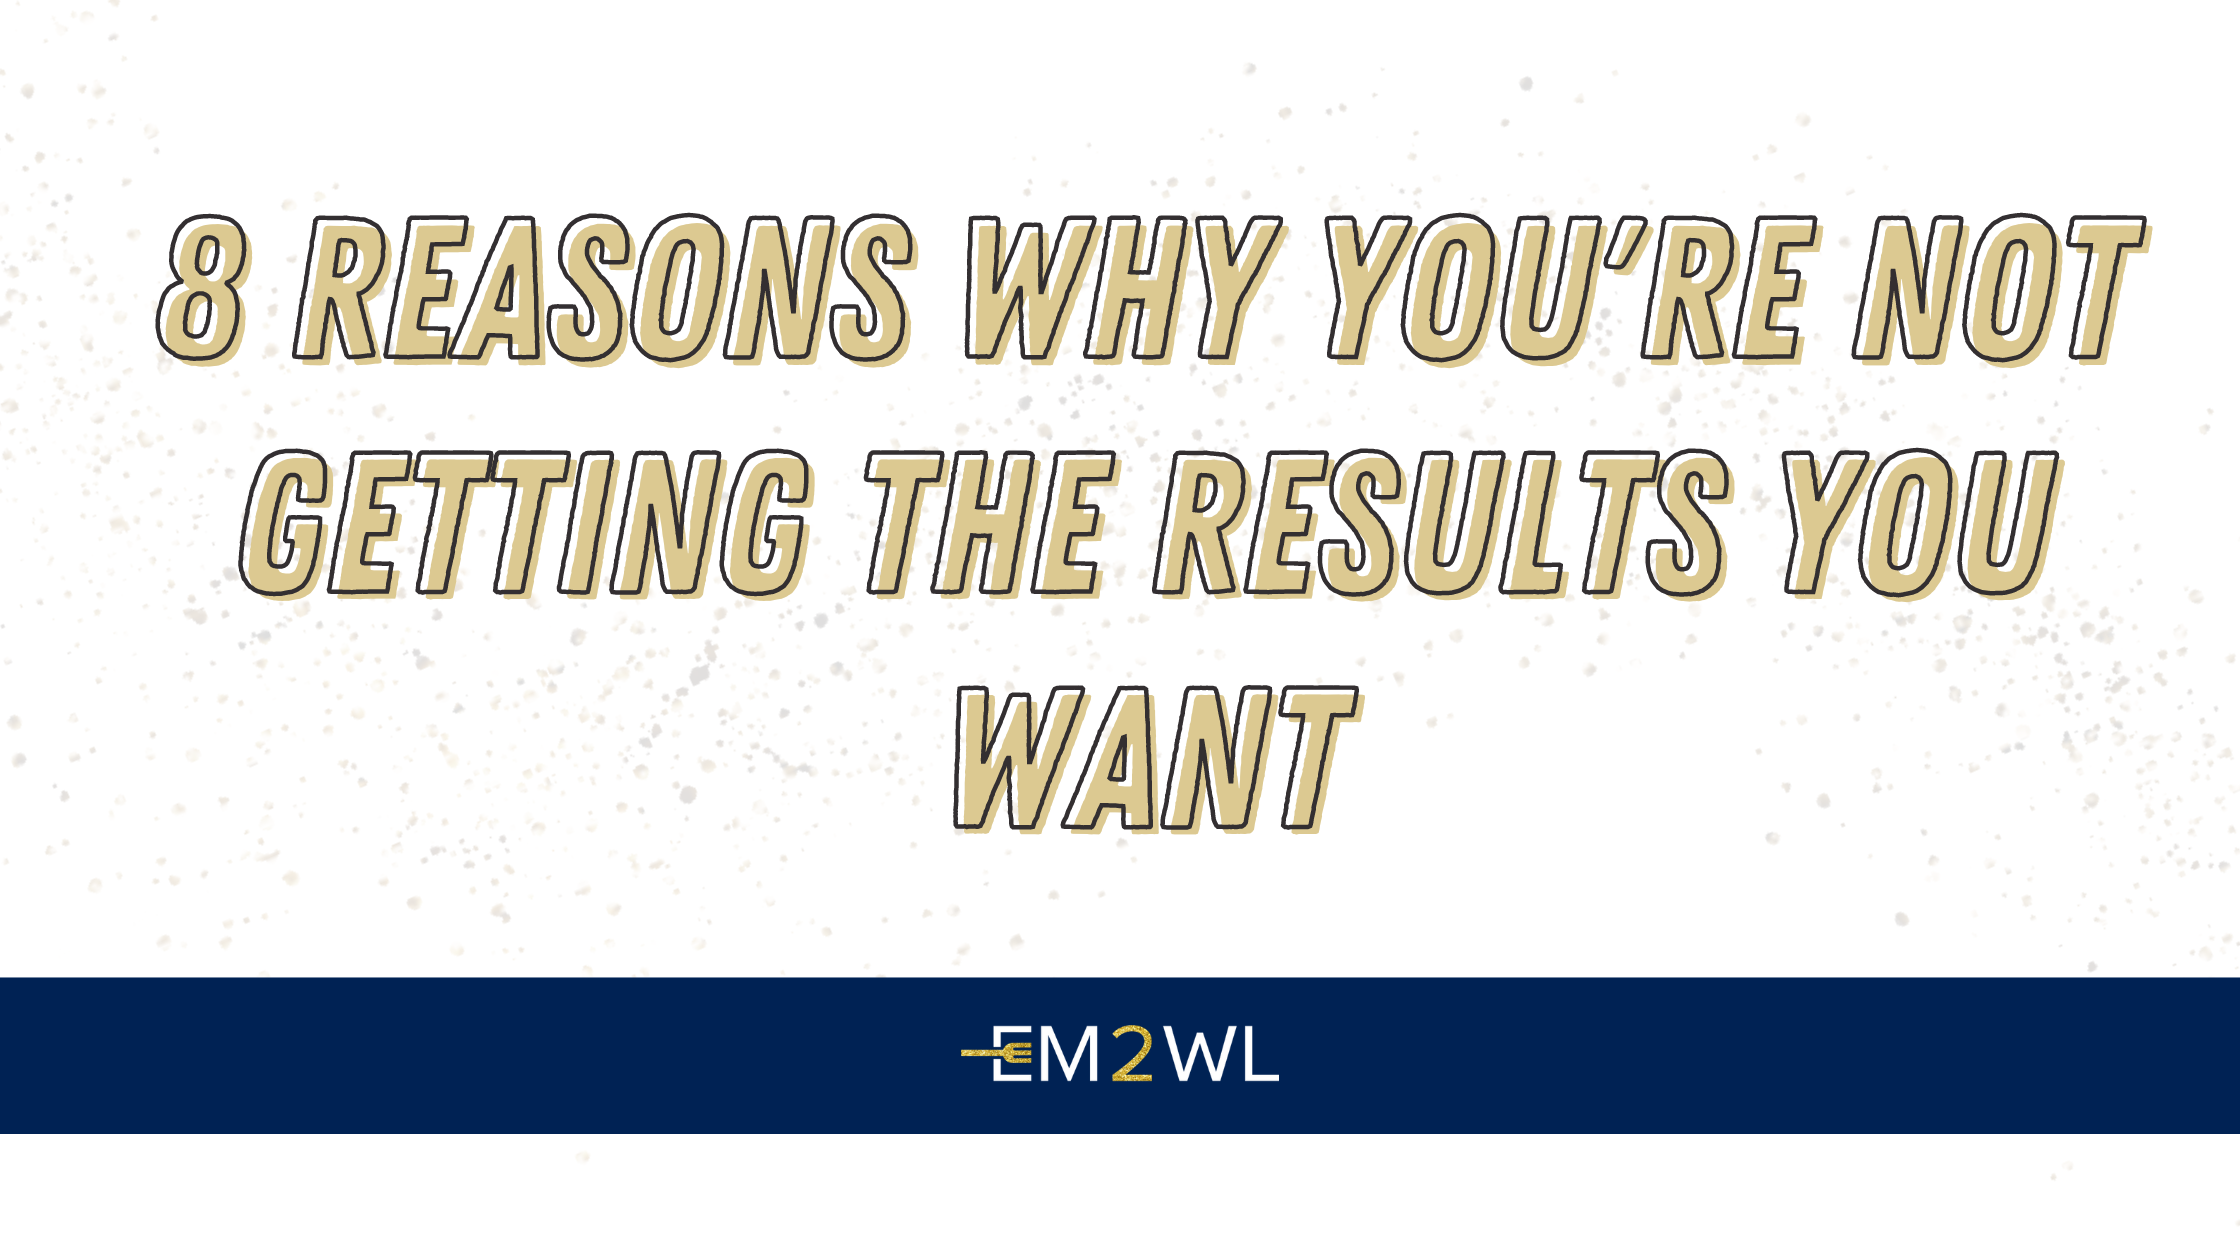 8 Reasons Why You're Not Getting The Results You Want